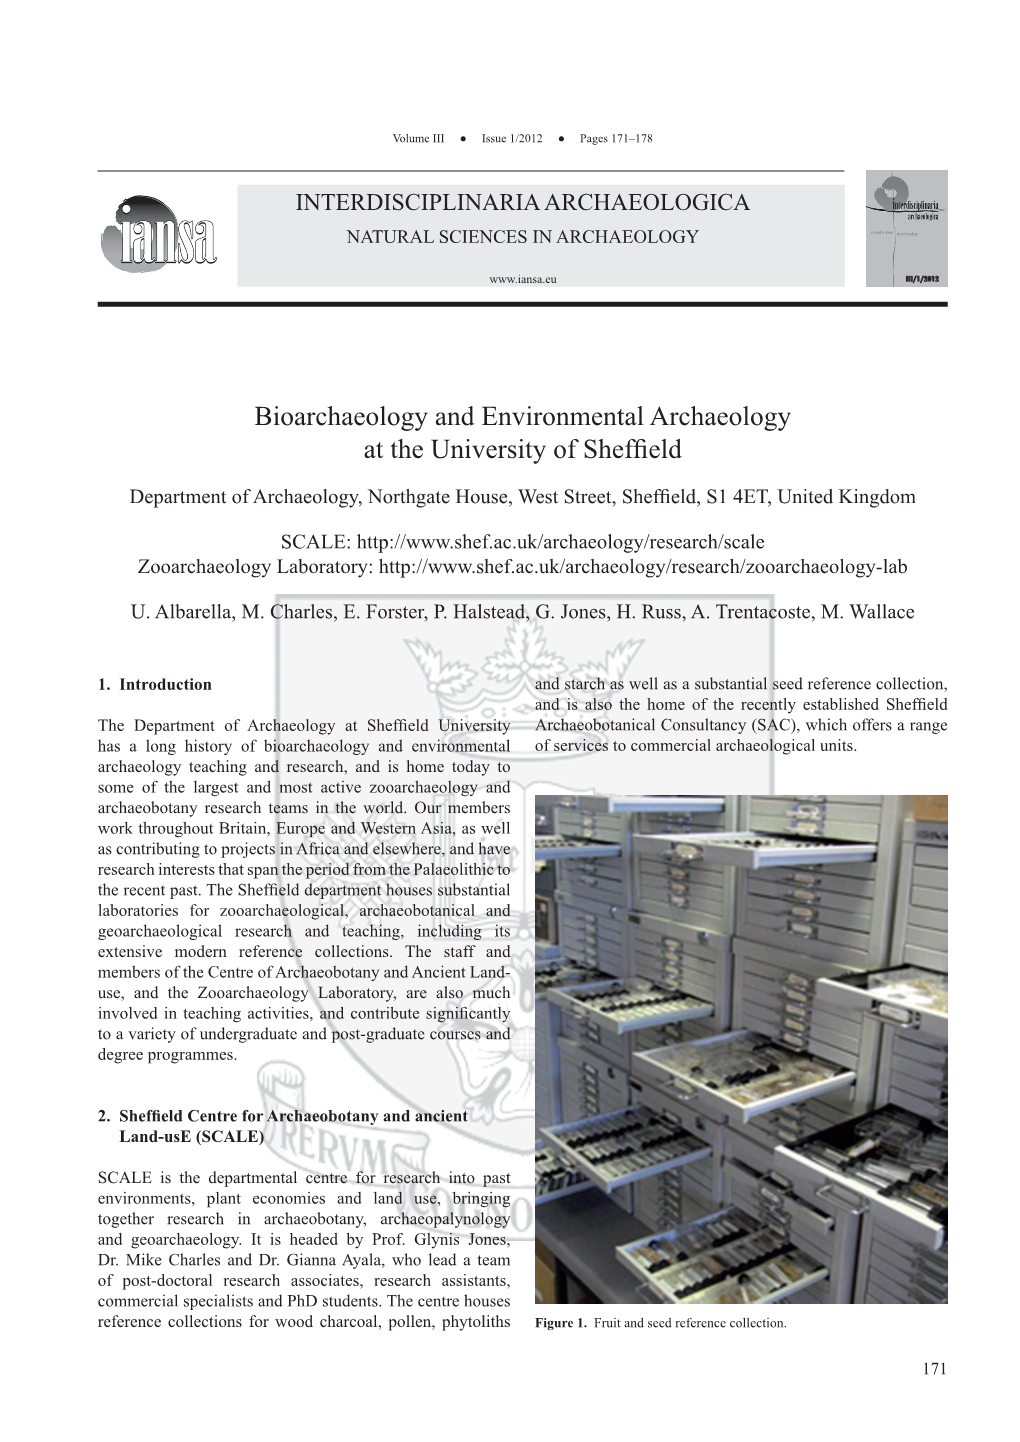 Bioarchaeology and Environmental Archaeology at the University of Sheffield